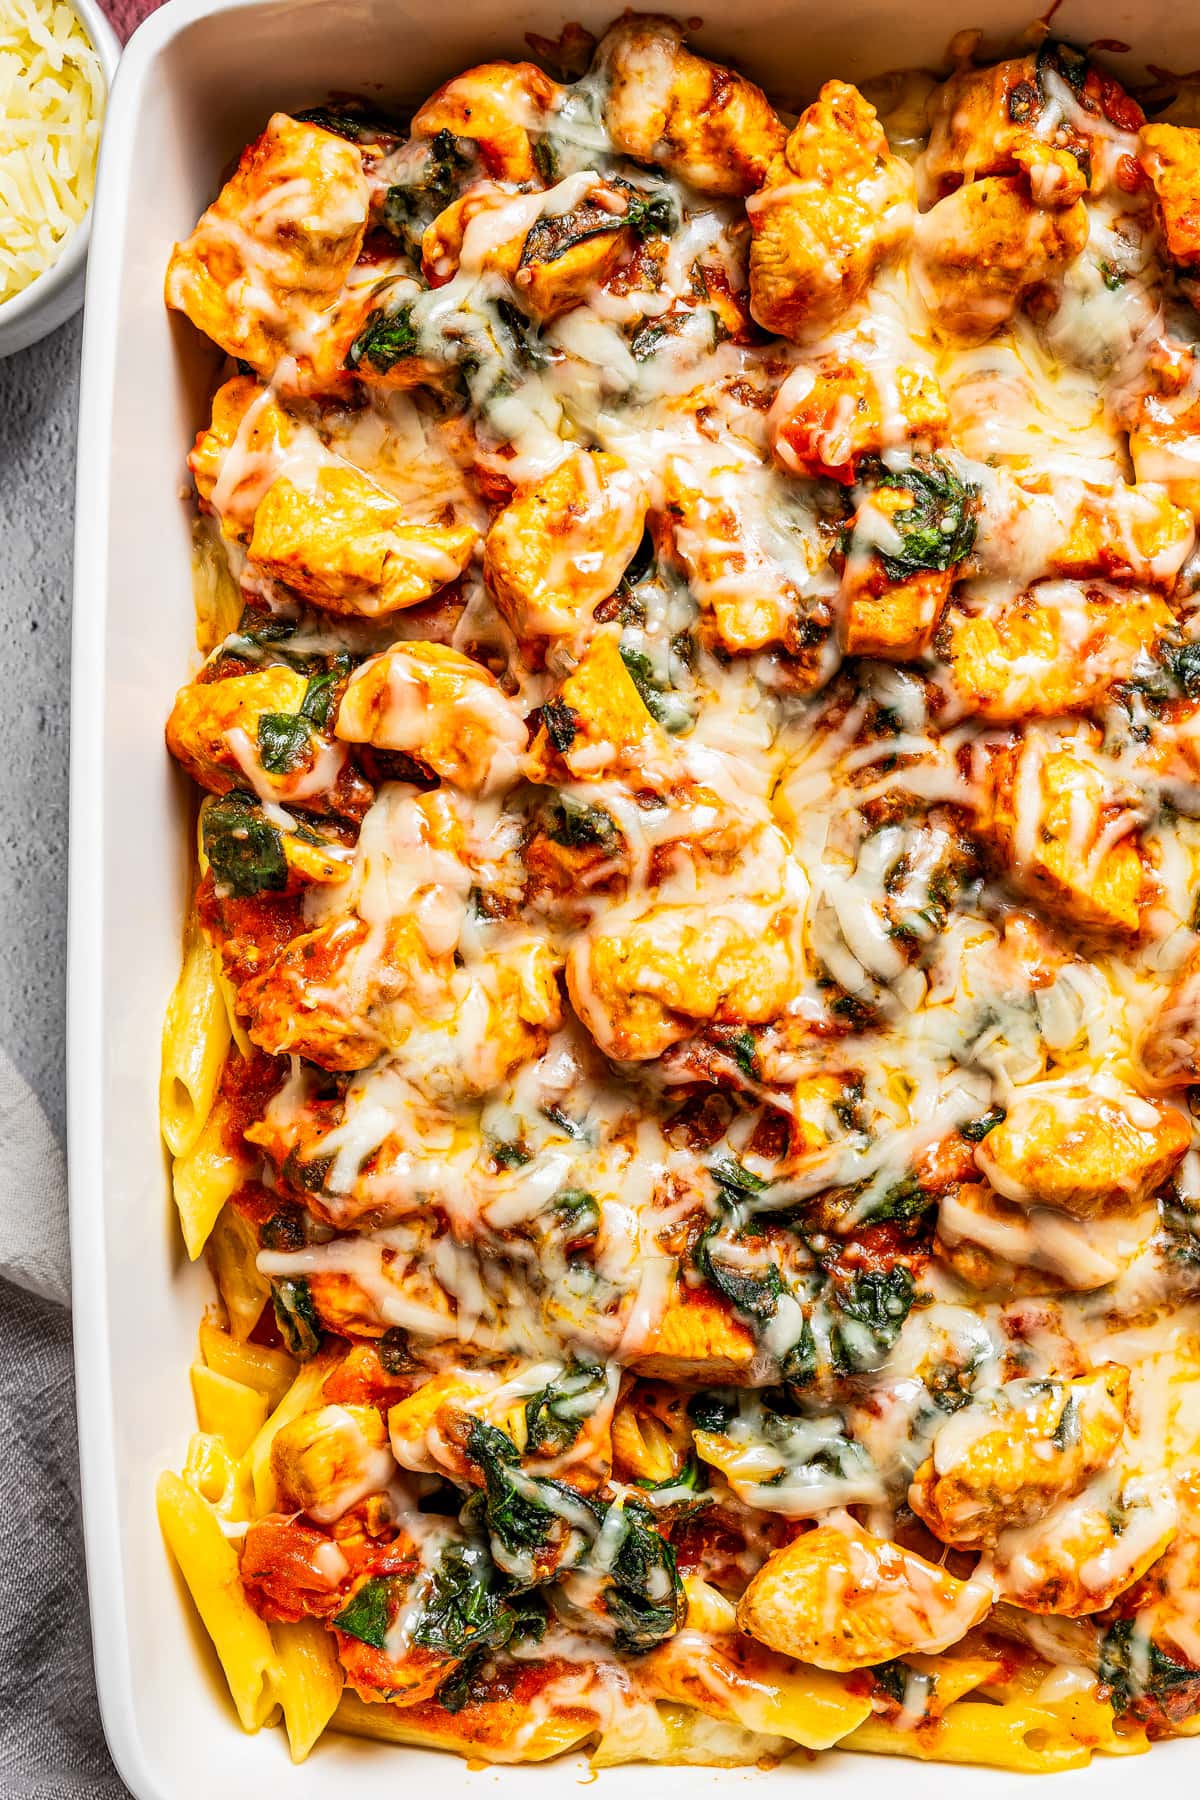 Close-up image of past and chicken in a casserole dish, topped with melted cheese.